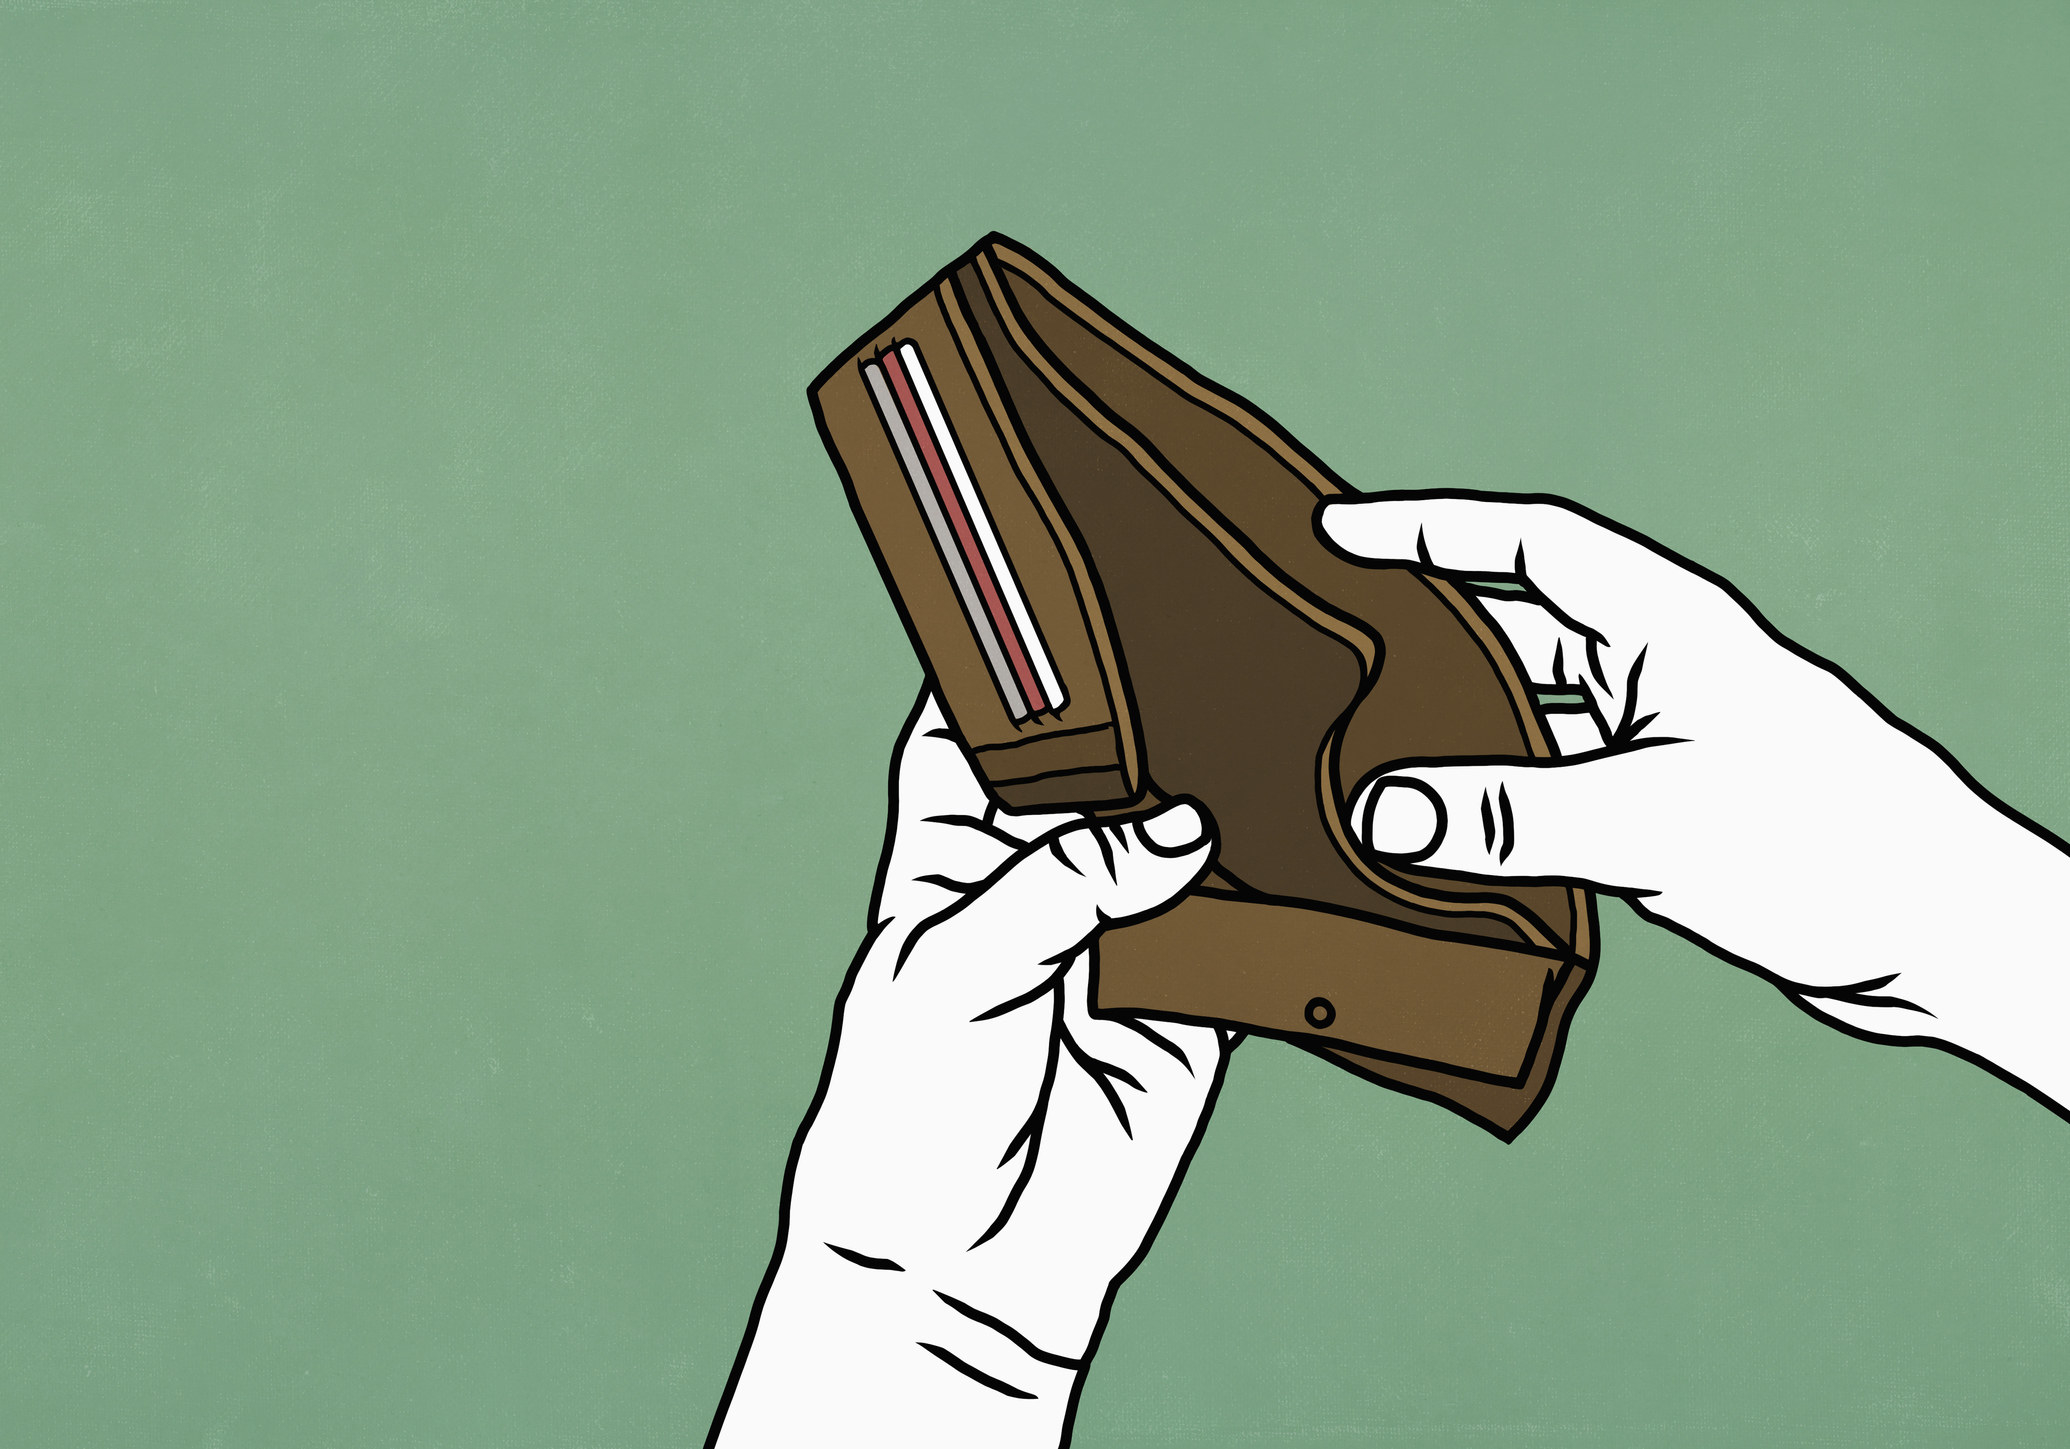 An illustration of a person opening their empty wallet